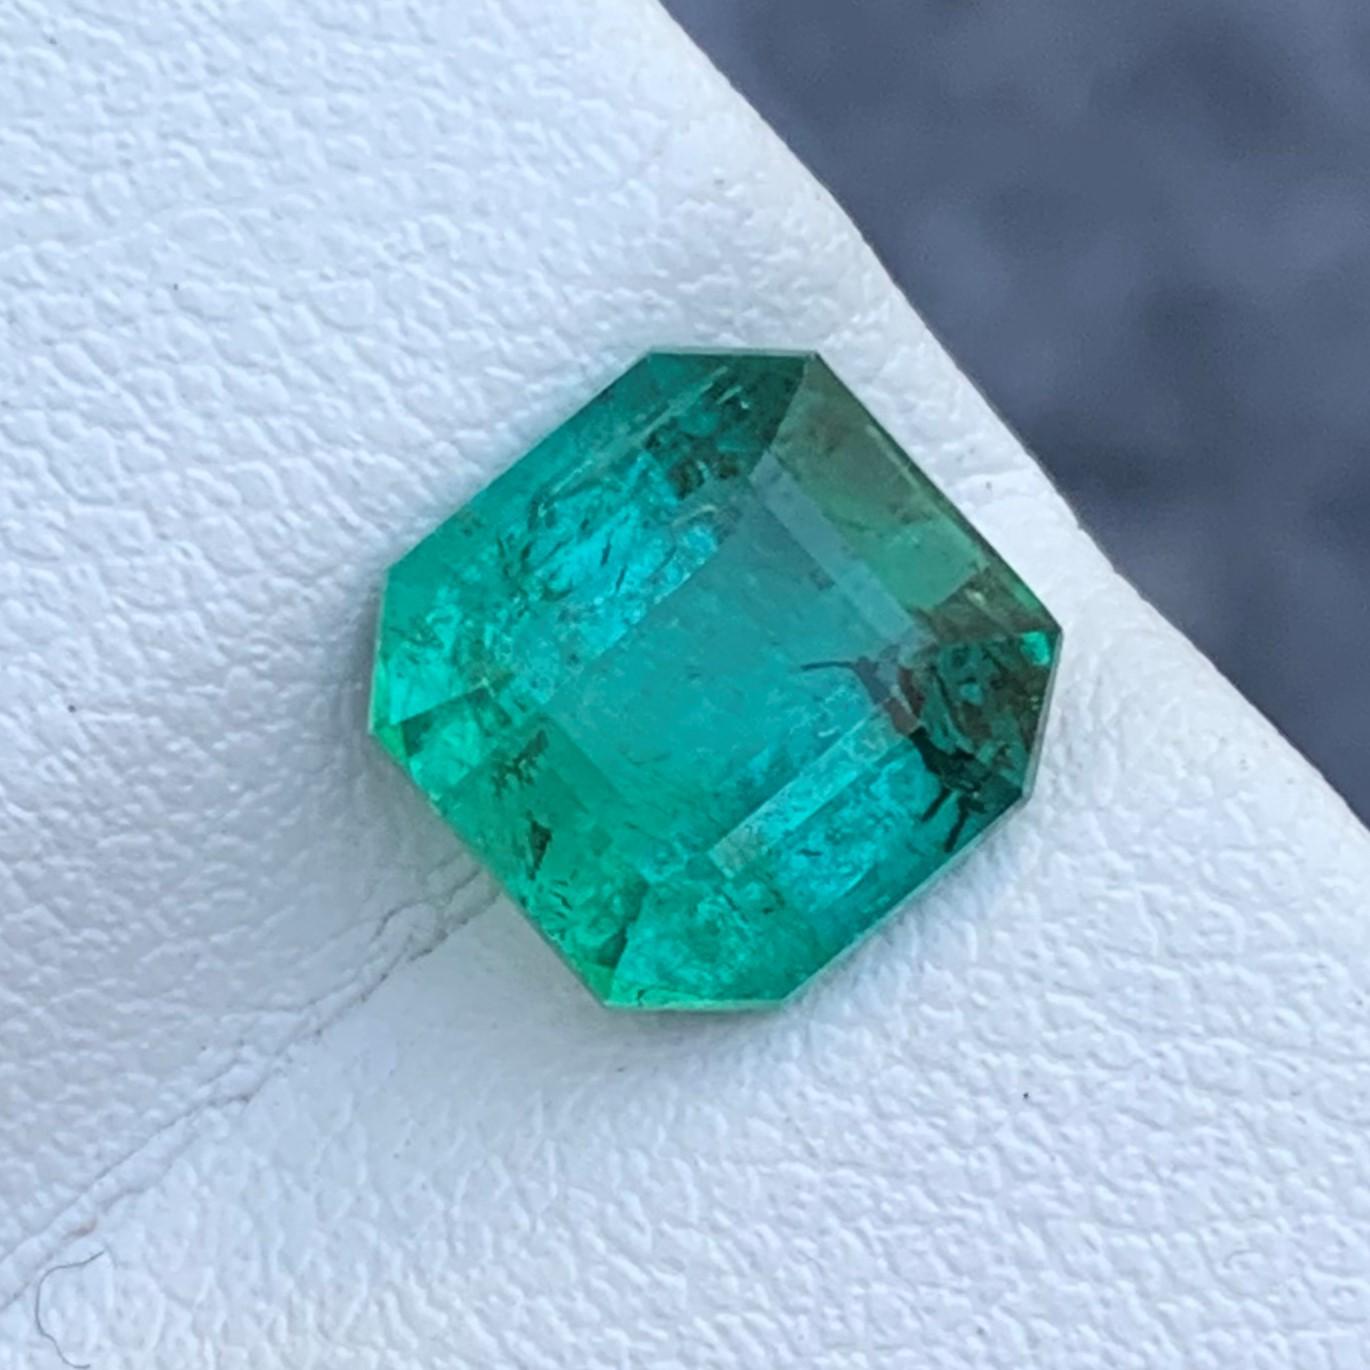 Octagon Cut 3.05 Carat Natural Loose Seafoam Tourmaline From Afghanistan Mine For Sale